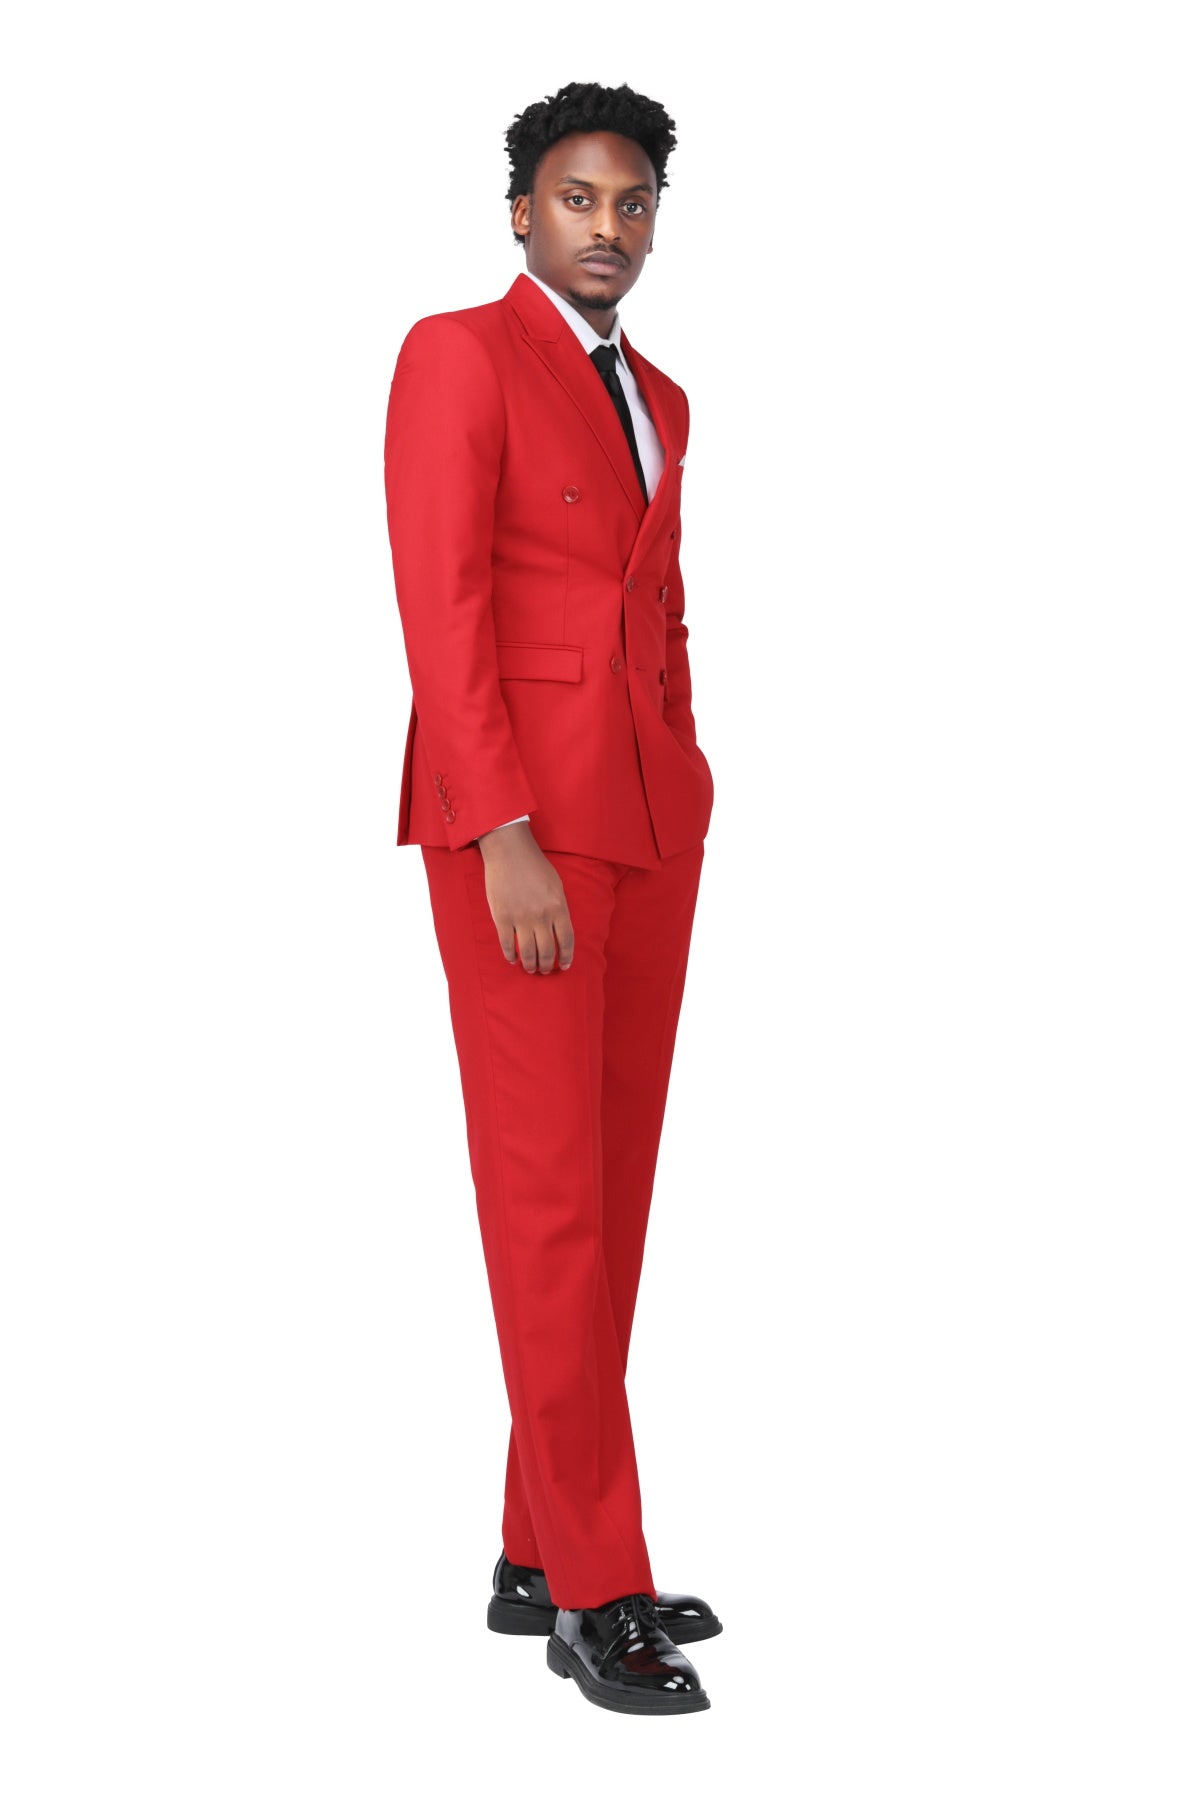 2-Piece Double Breasted Solid Color Red Suit